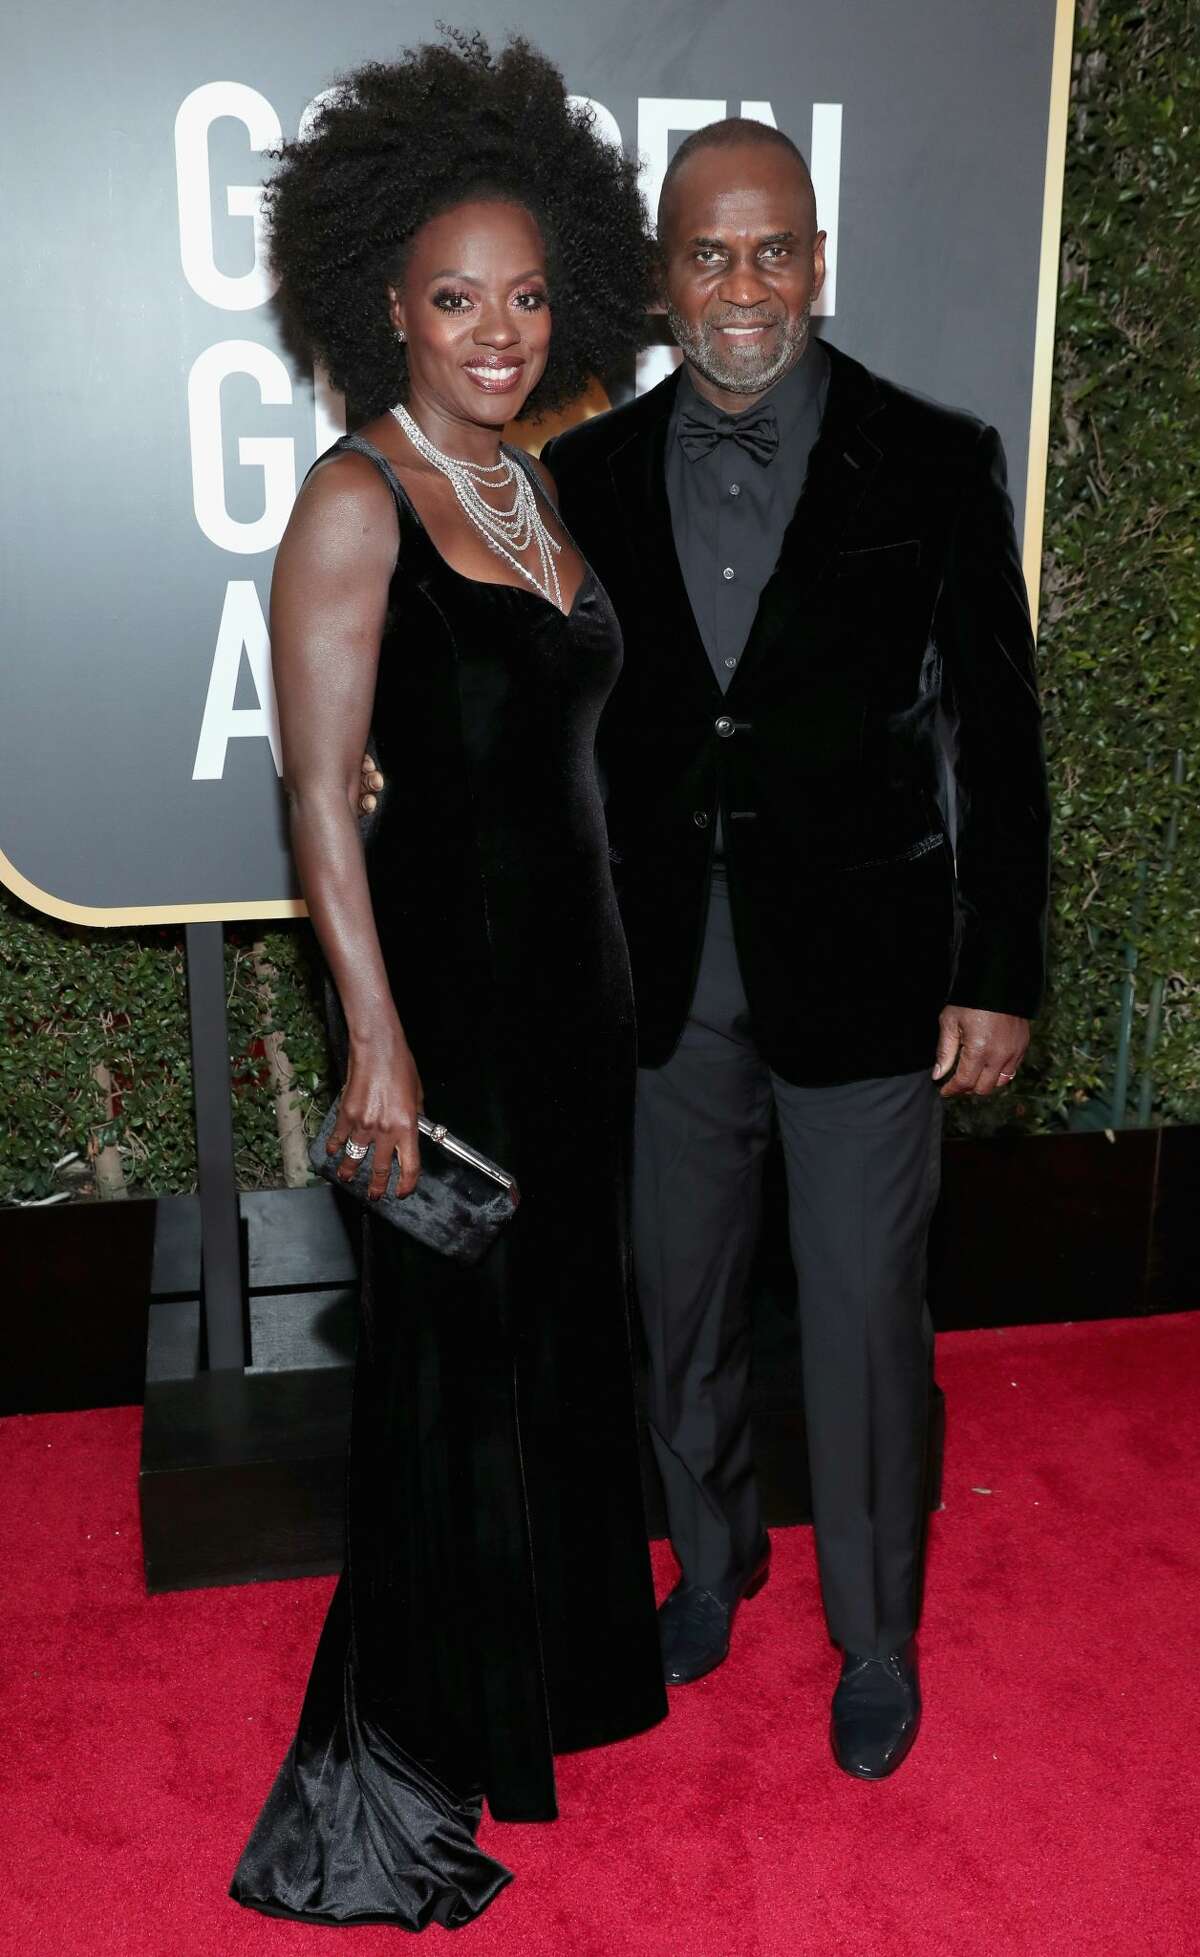 BEVERLY HILLS, CA - JANUARY 07: 75th ANNUAL GOLDEN GLOBE AWARDS -- Pictured: (l-r) Actors Viola Davis and Julius Tennon arrive to the 75th Annual Golden Globe Awards held at the Beverly Hilton Hotel on January 7, 2018. (Photo by Neilson Barnard/NBCUniversal/NBCU Photo Bank via Getty Images)